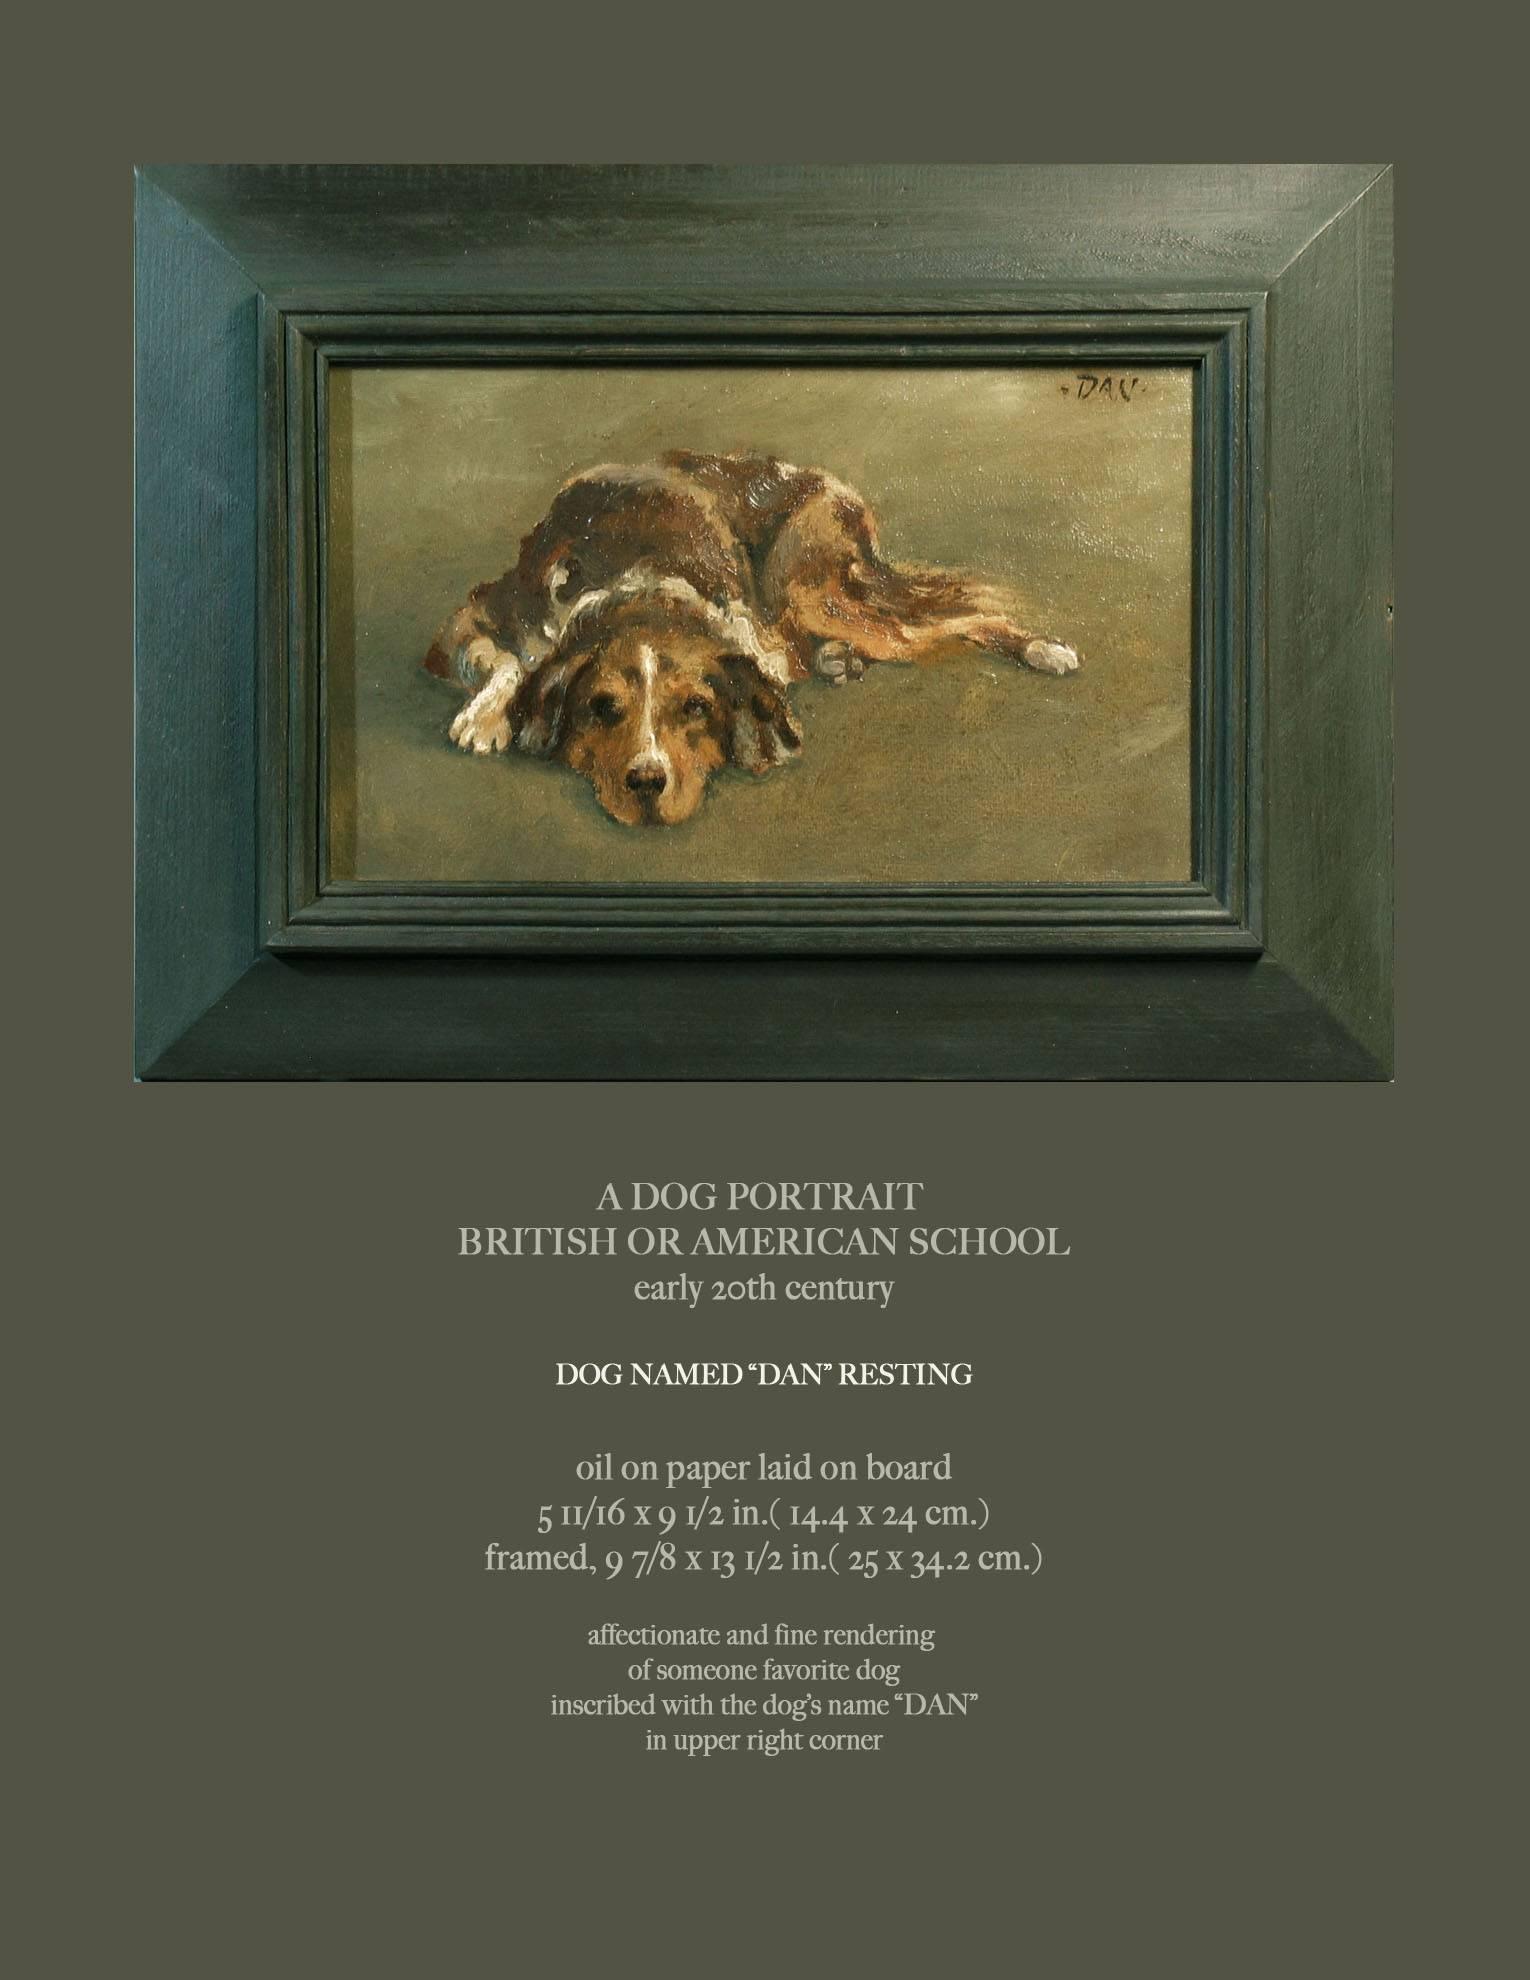 A dog portrait, British or American school, early 20th century. Painting of a dog resting named 